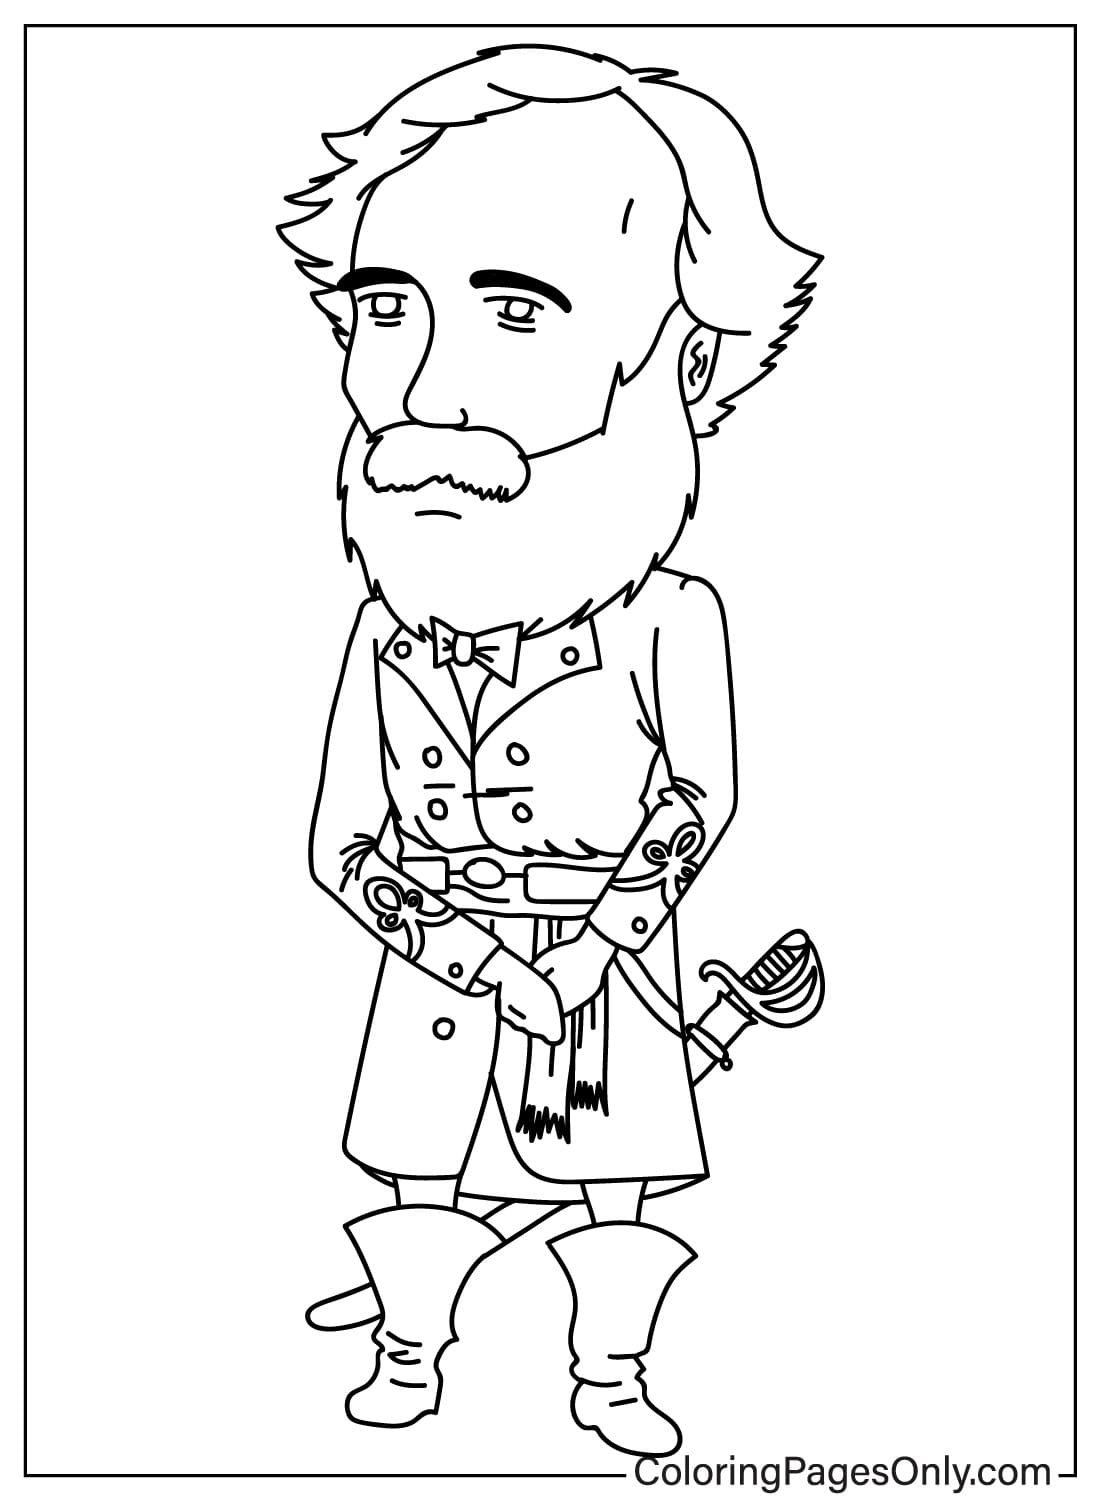 Robert e lee coloring page